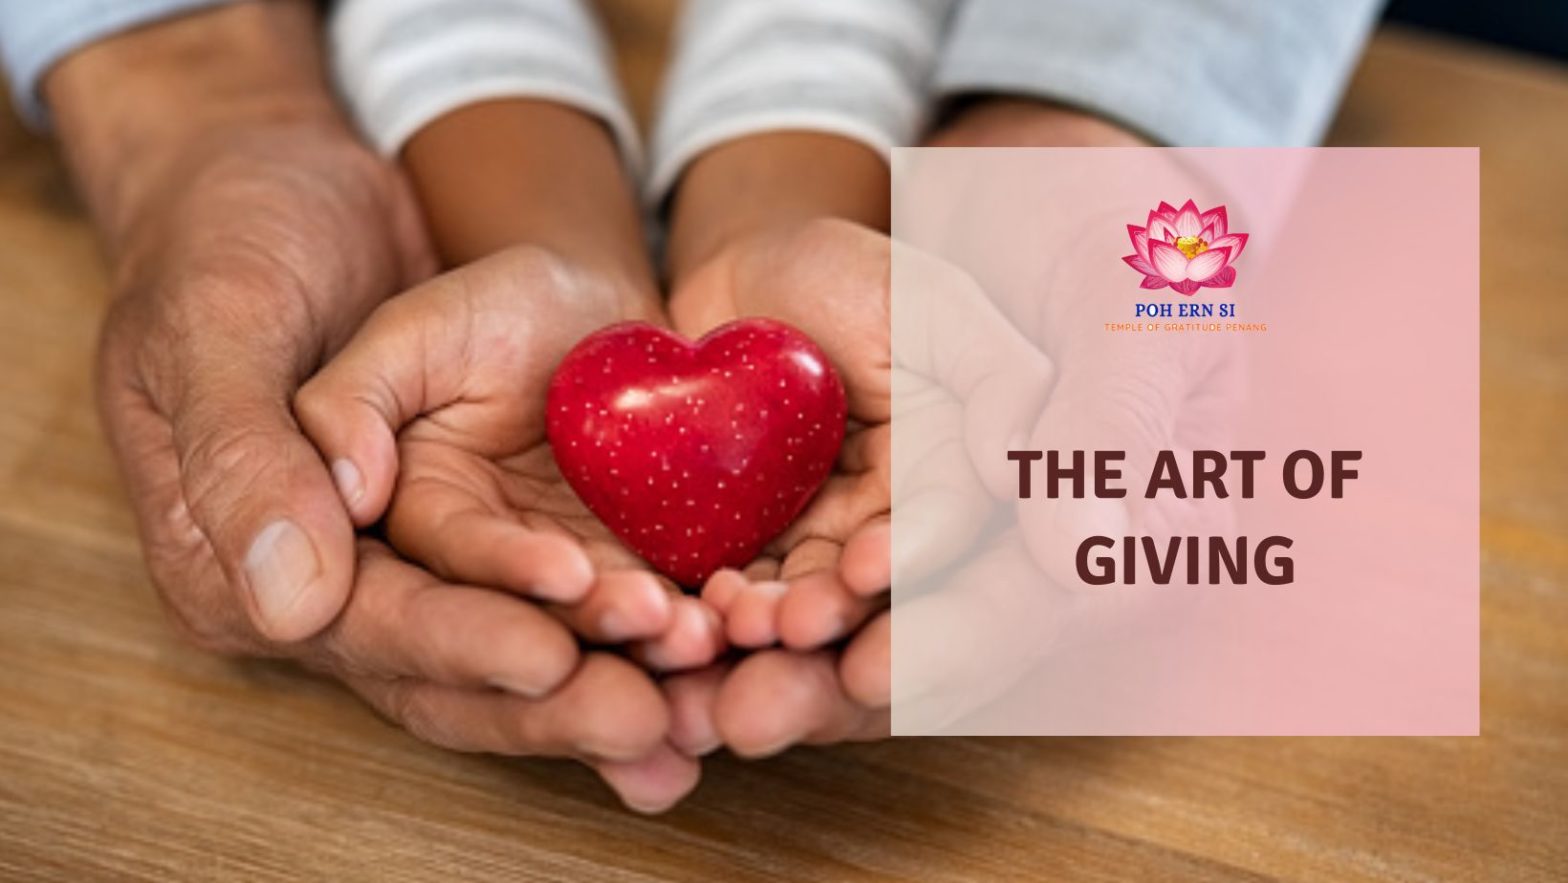 The Art of Giving, Joy of Giving, Charity featured image - Poh Ern Si Buddhist Blog